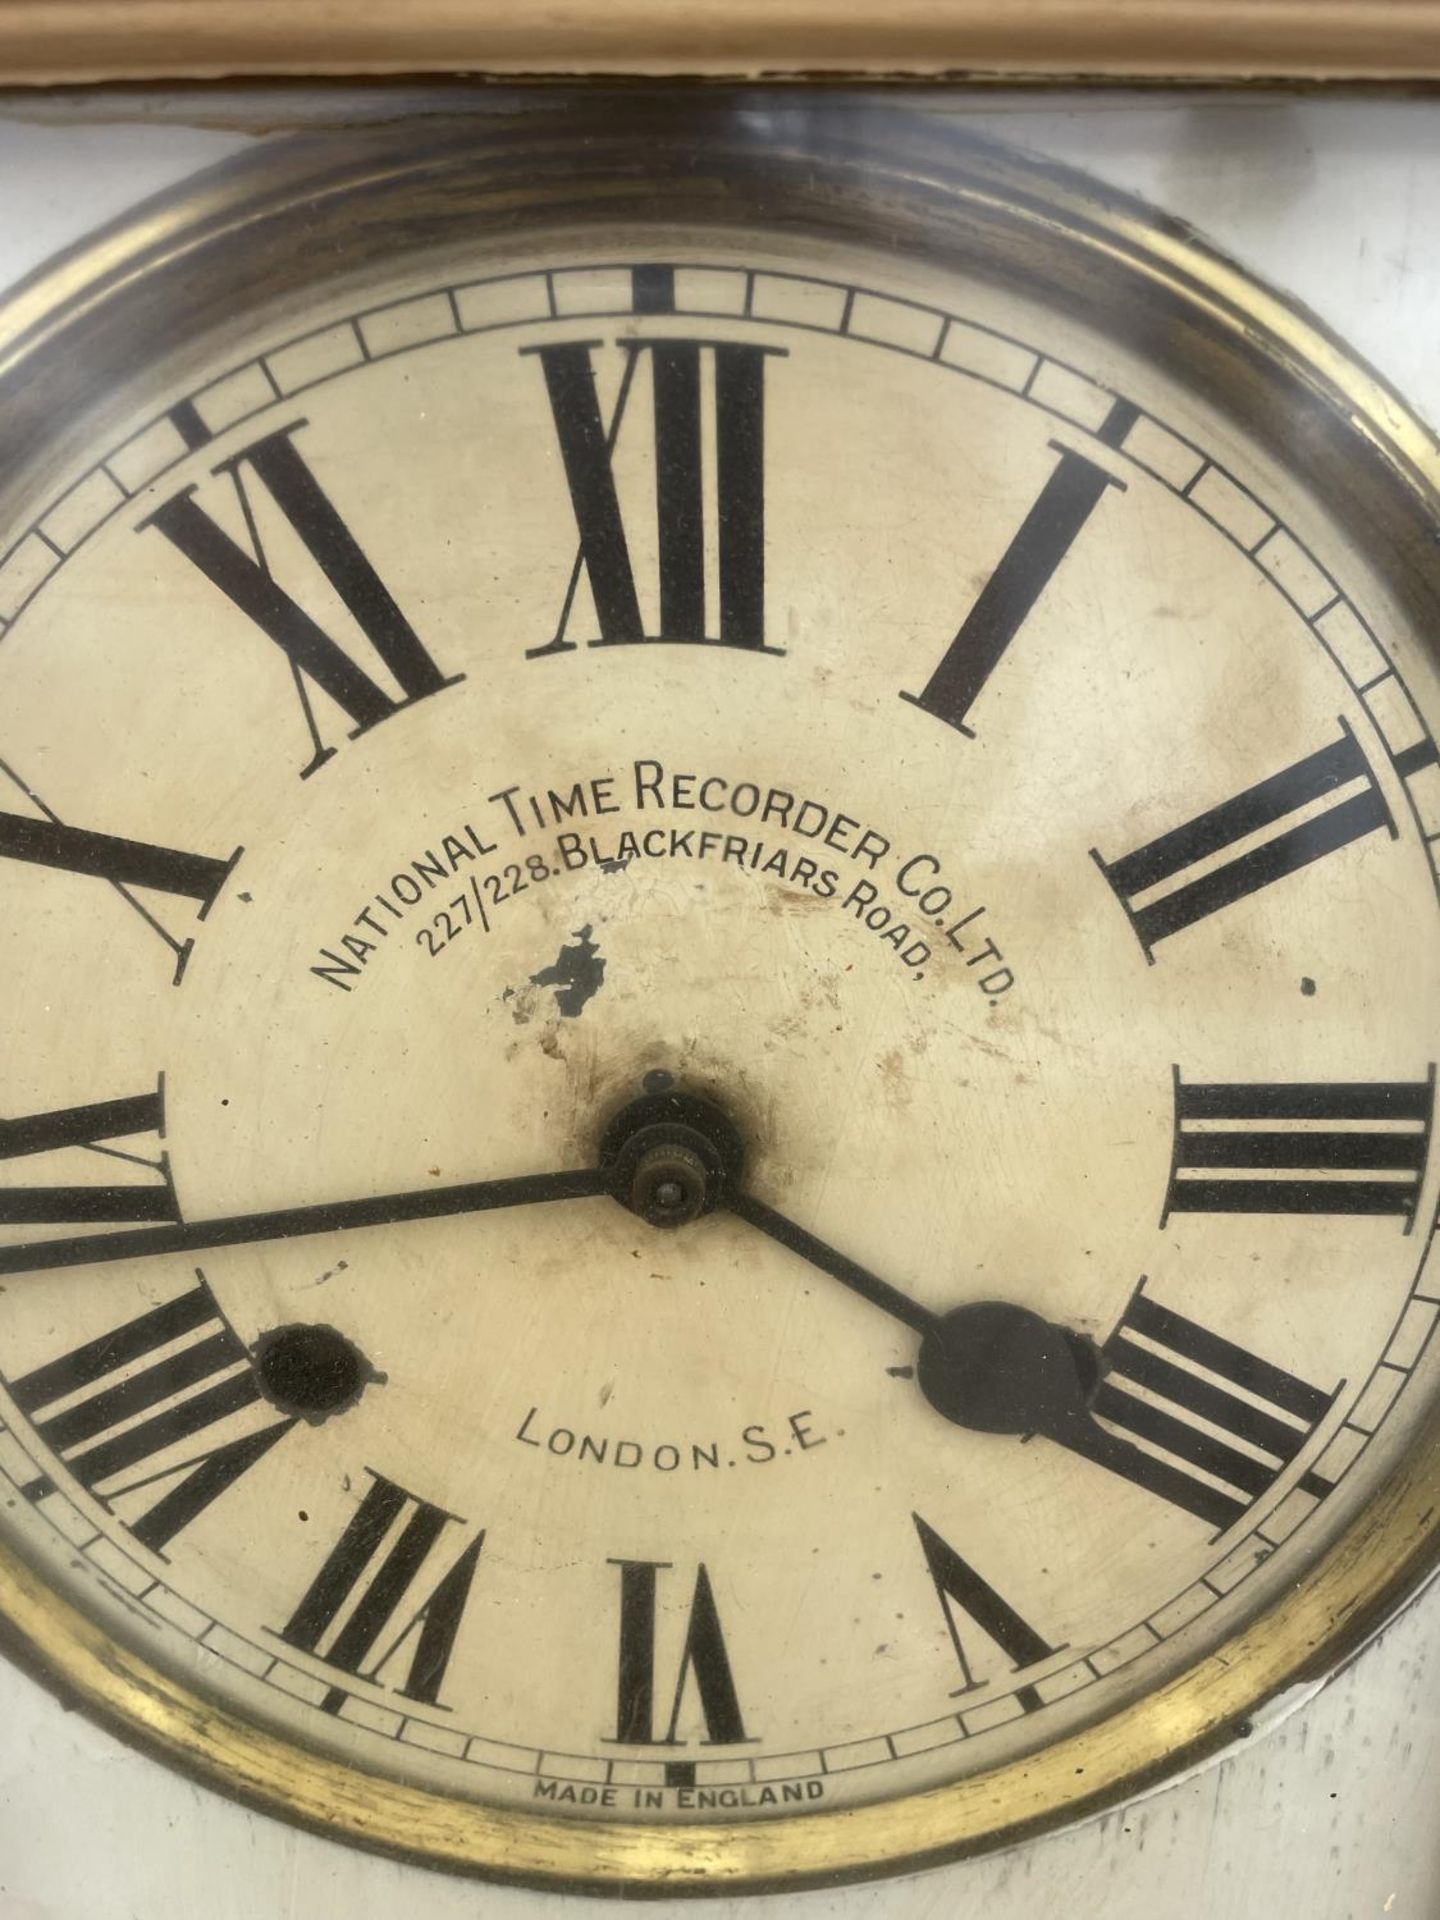 A NATIONAL TIME RECORDER CO LTD 227/228 BLACKFRIARS ROAD LONDON SE CLOCKING IN/OUT CLOCK - Image 3 of 10